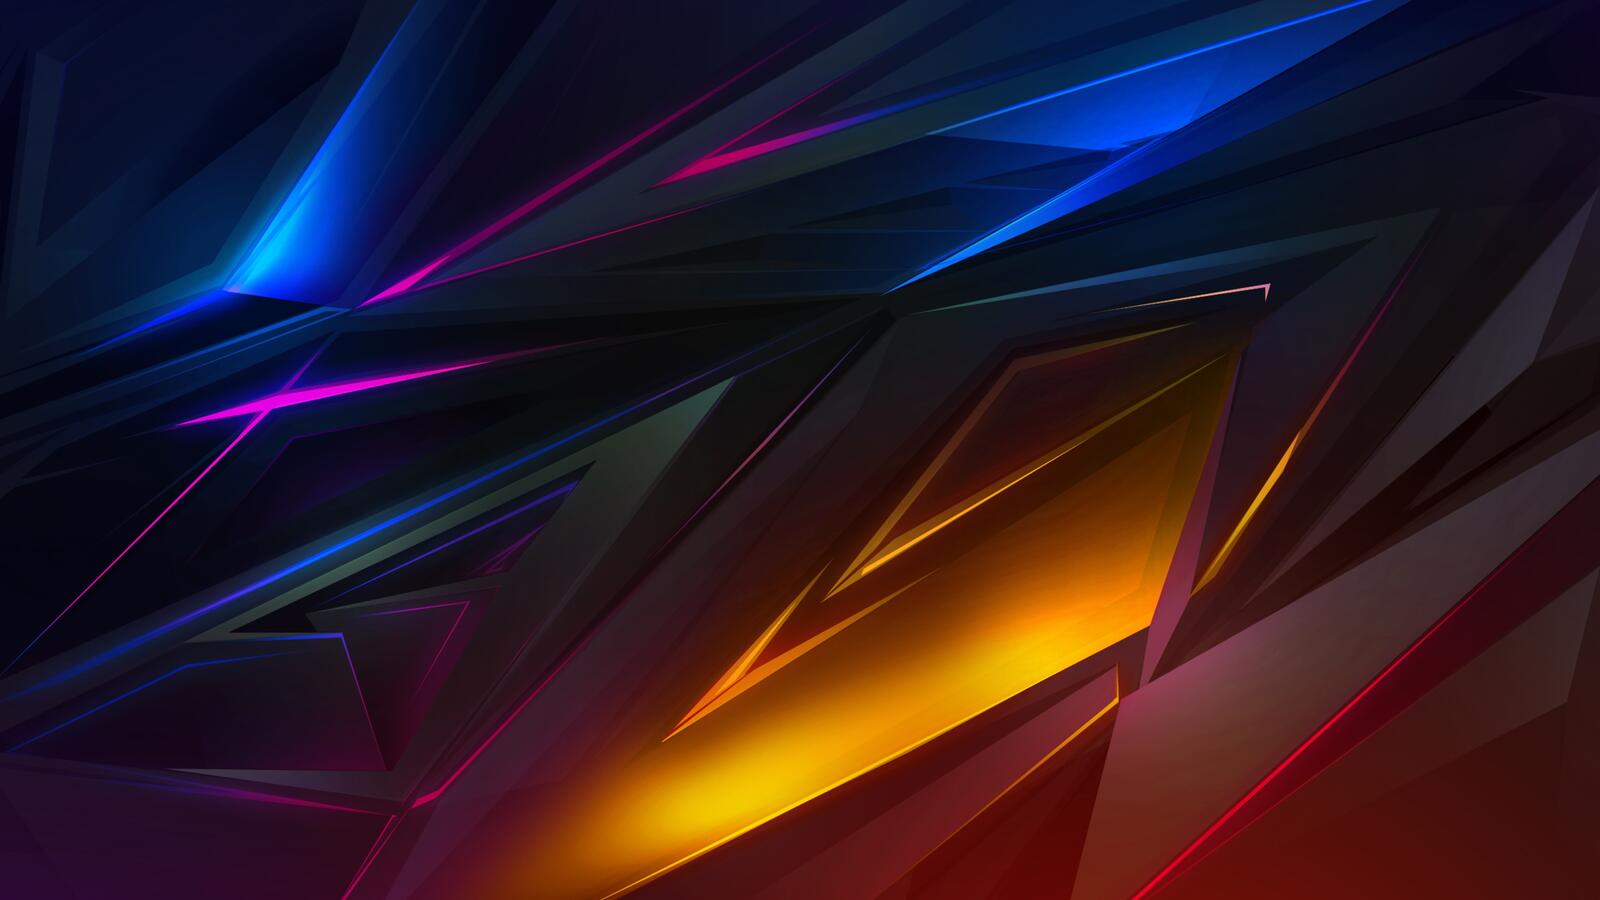 Wallpapers wallpaper colorful triangles glowing modern on the desktop